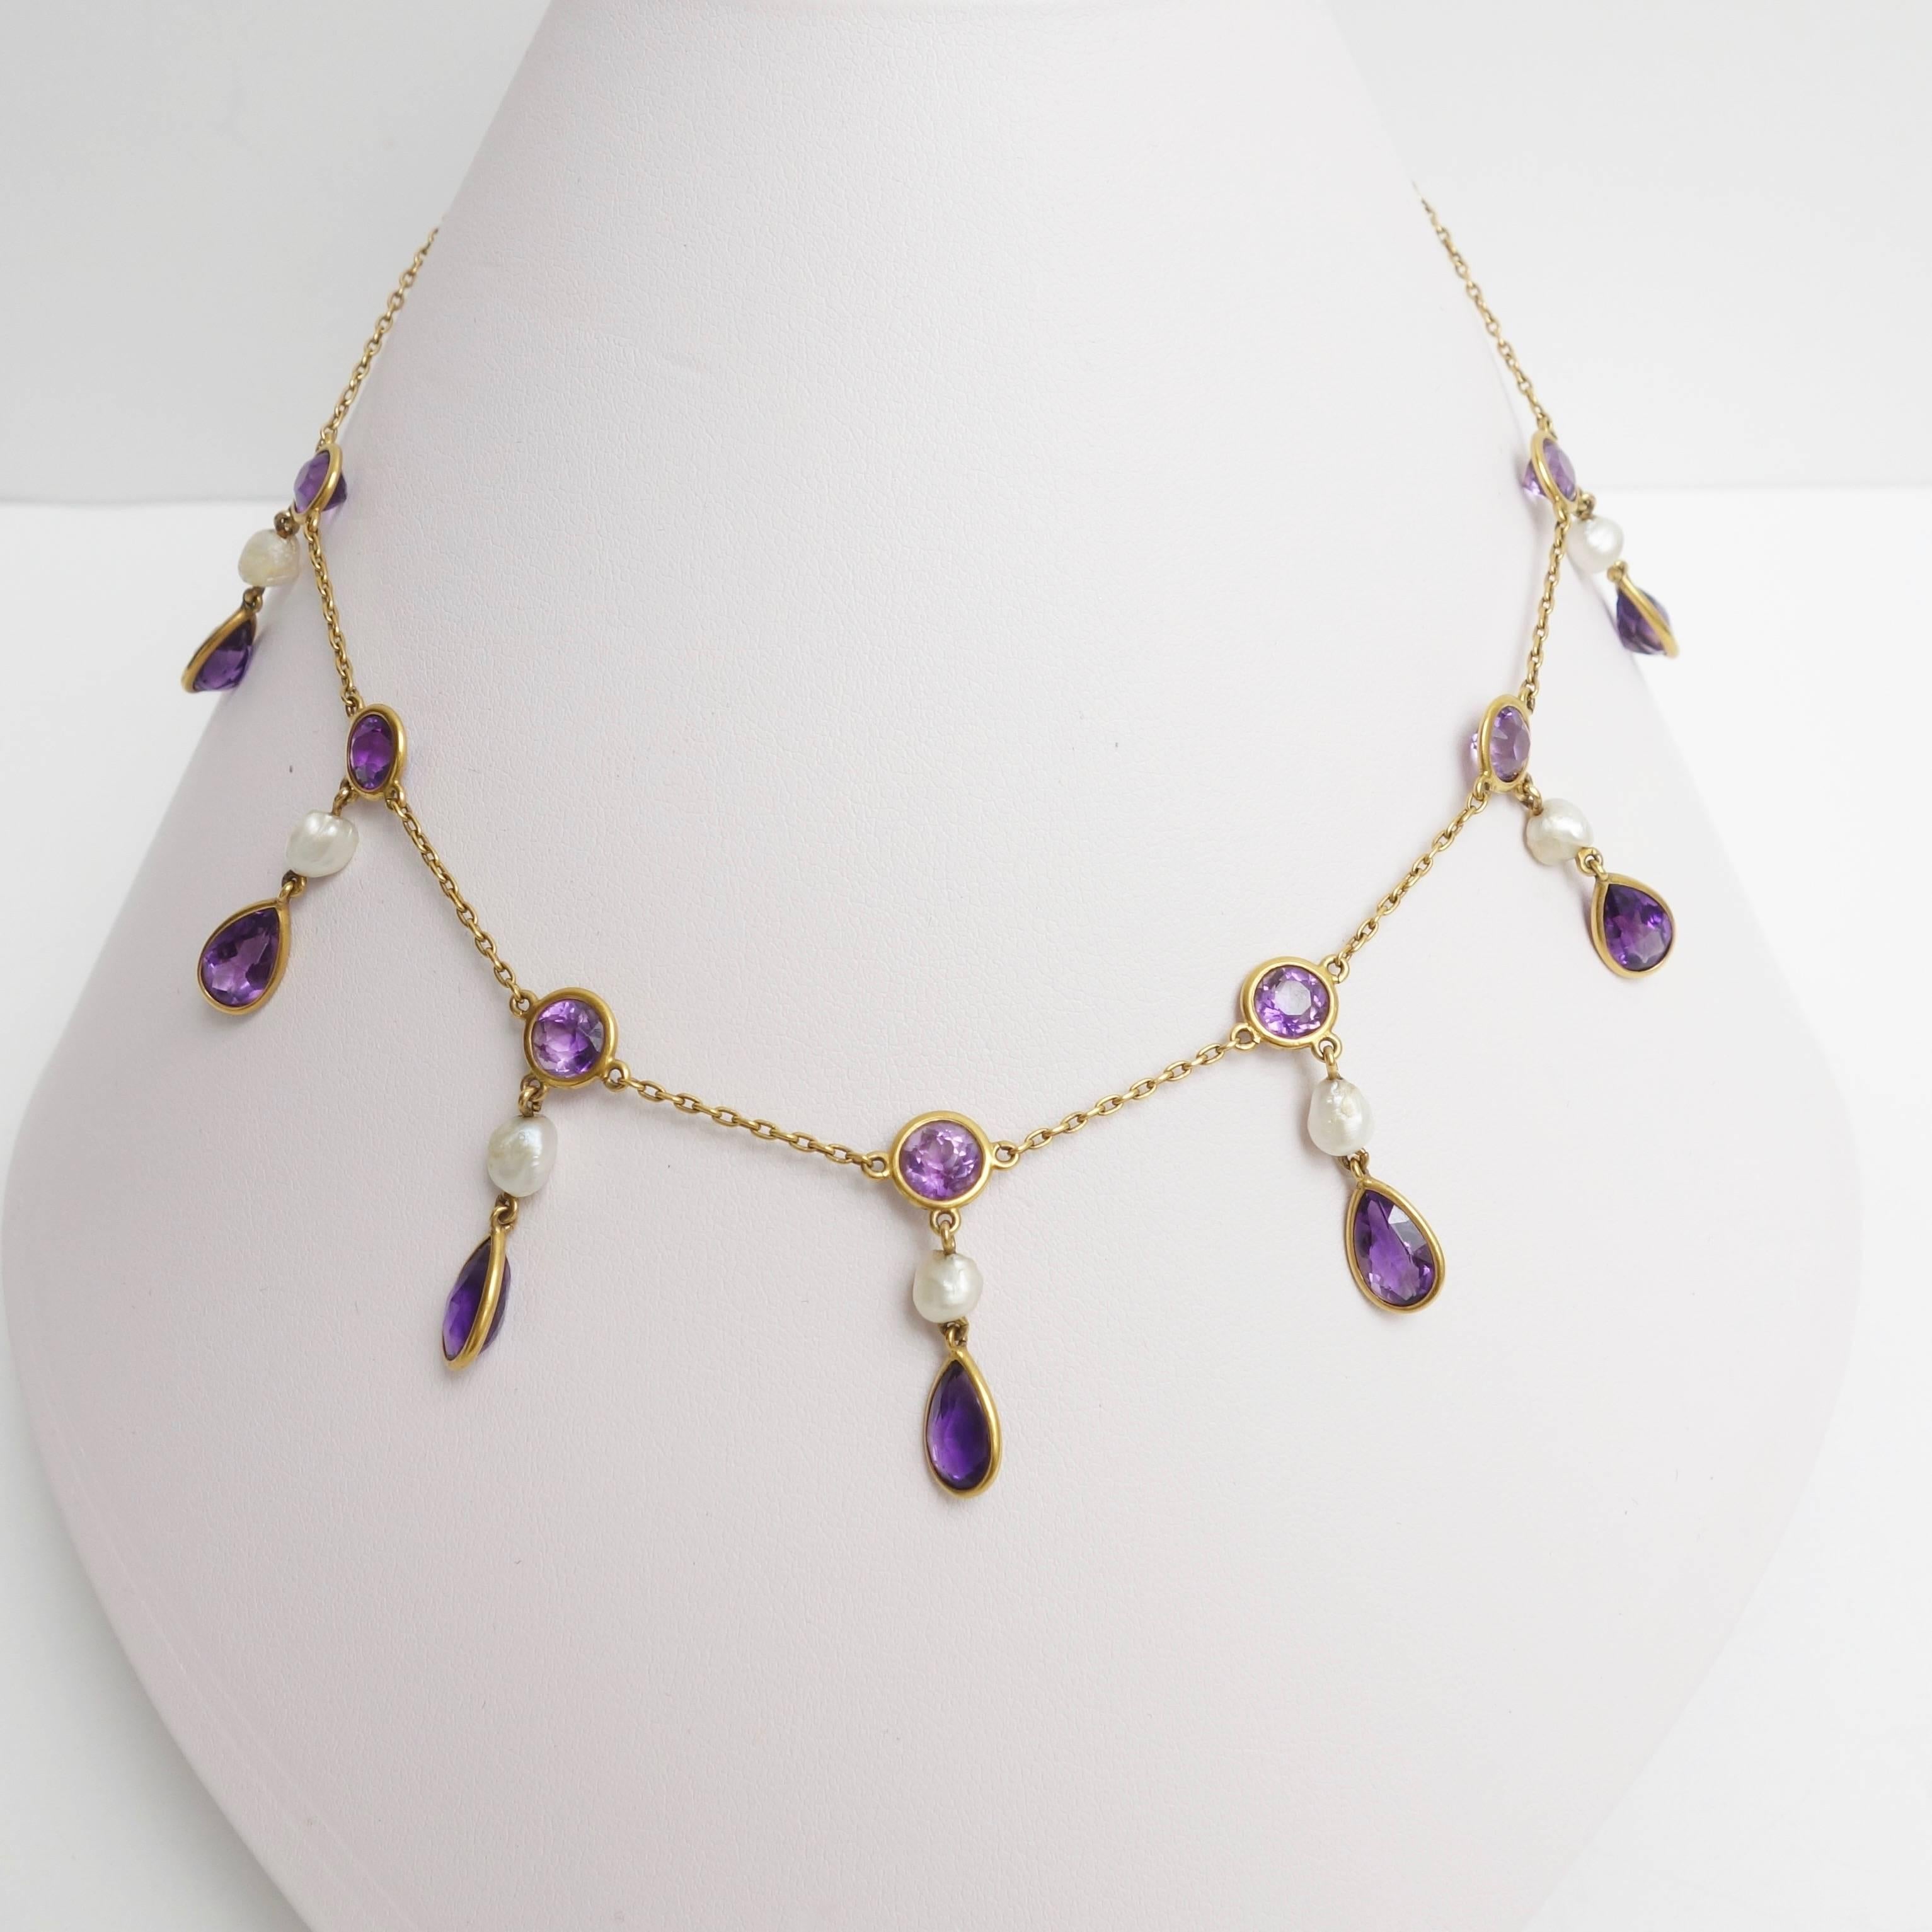 Crafted in 18K yellow gold, the necklace features seven amethyst and natural pearl pendants. Each pendant is composed of a bezel set pear shape amethyst supported by a baroque shape natural pearl and a bezel set round amethyst. 
Approximate total